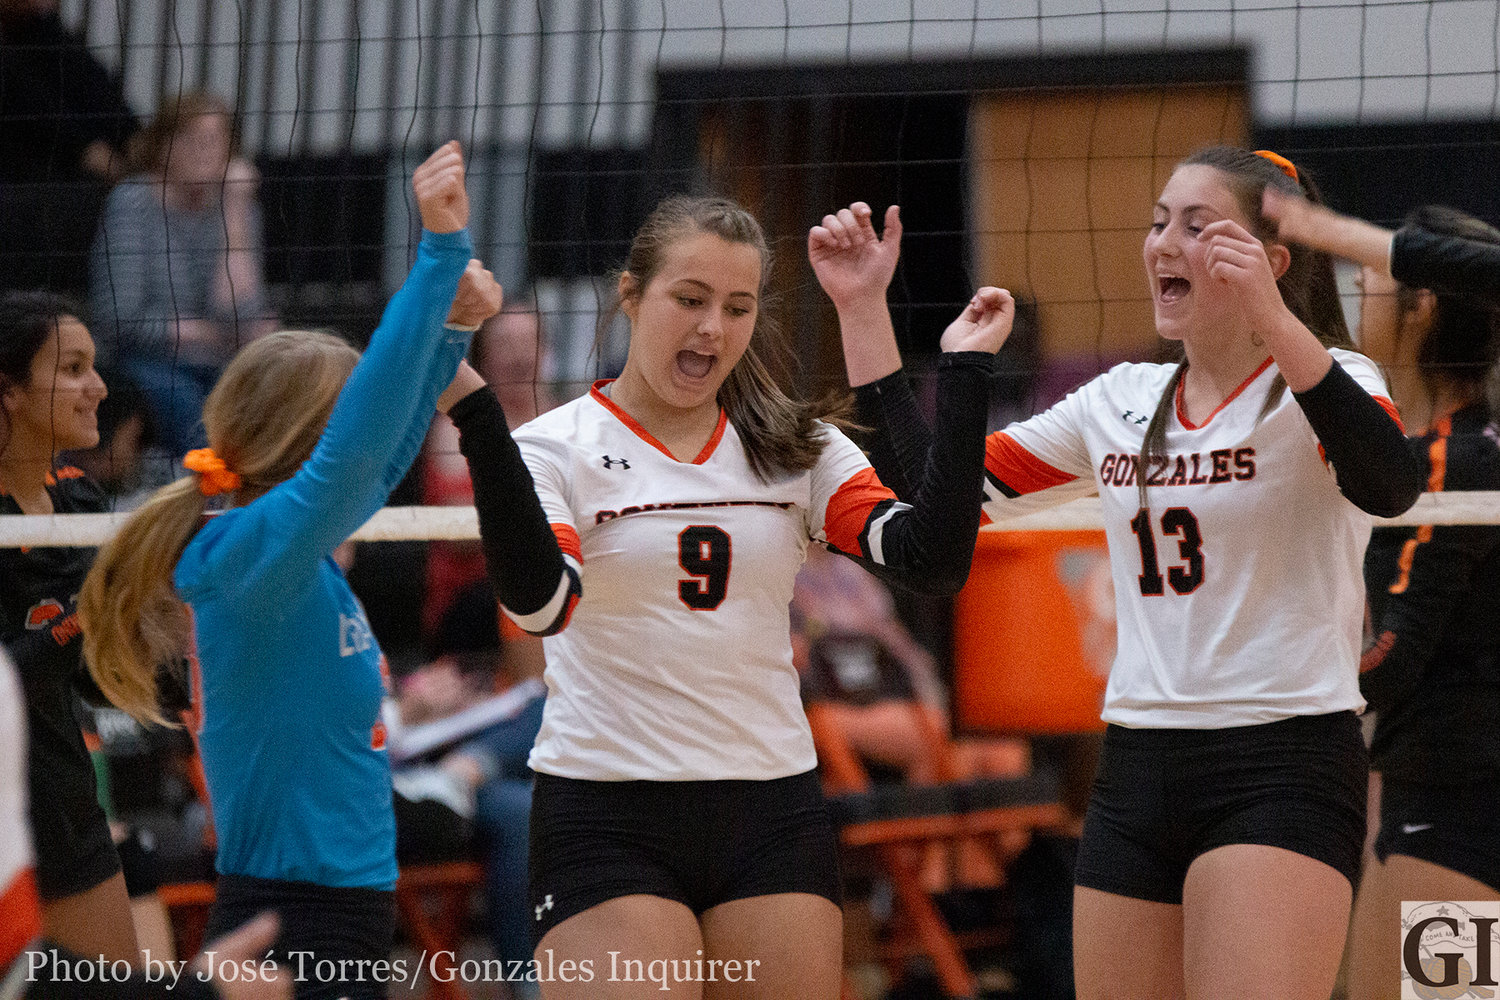 Kristin Baker (9) and Hayley Sample (13) celebrate a kill with the team.